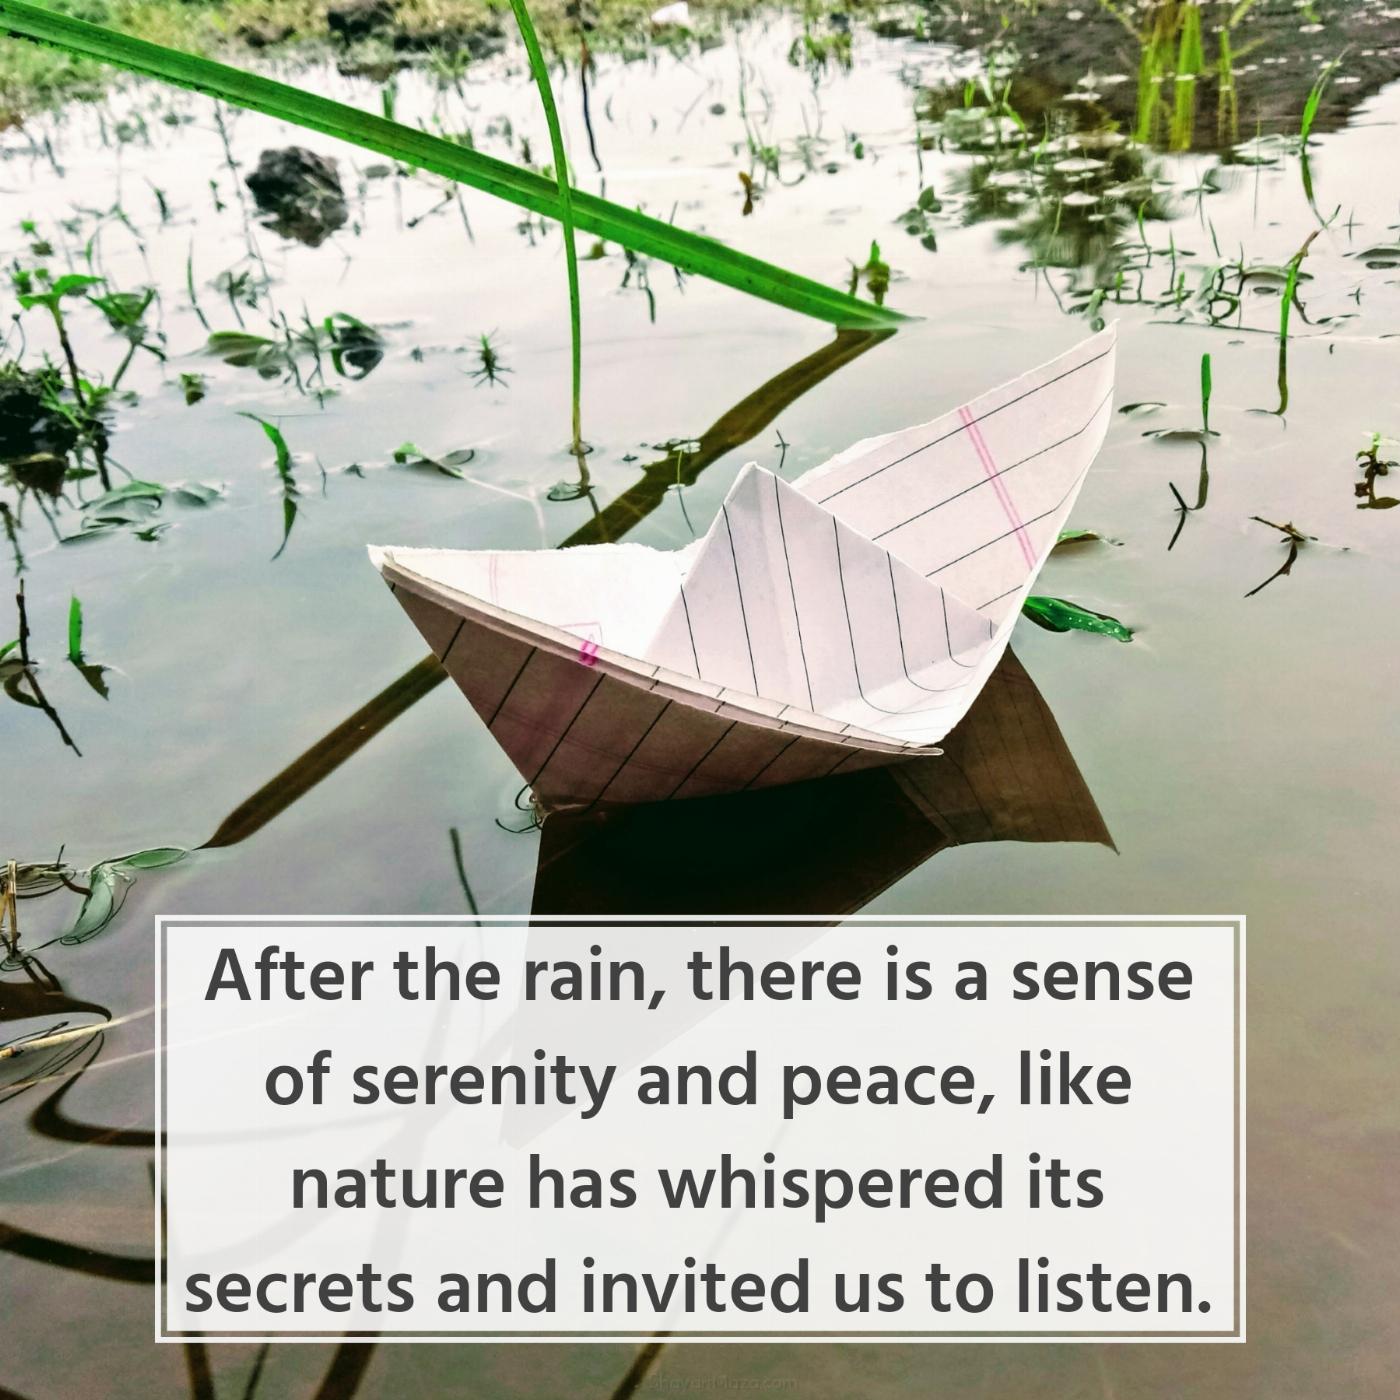 After the rain there is a sense of serenity and peace